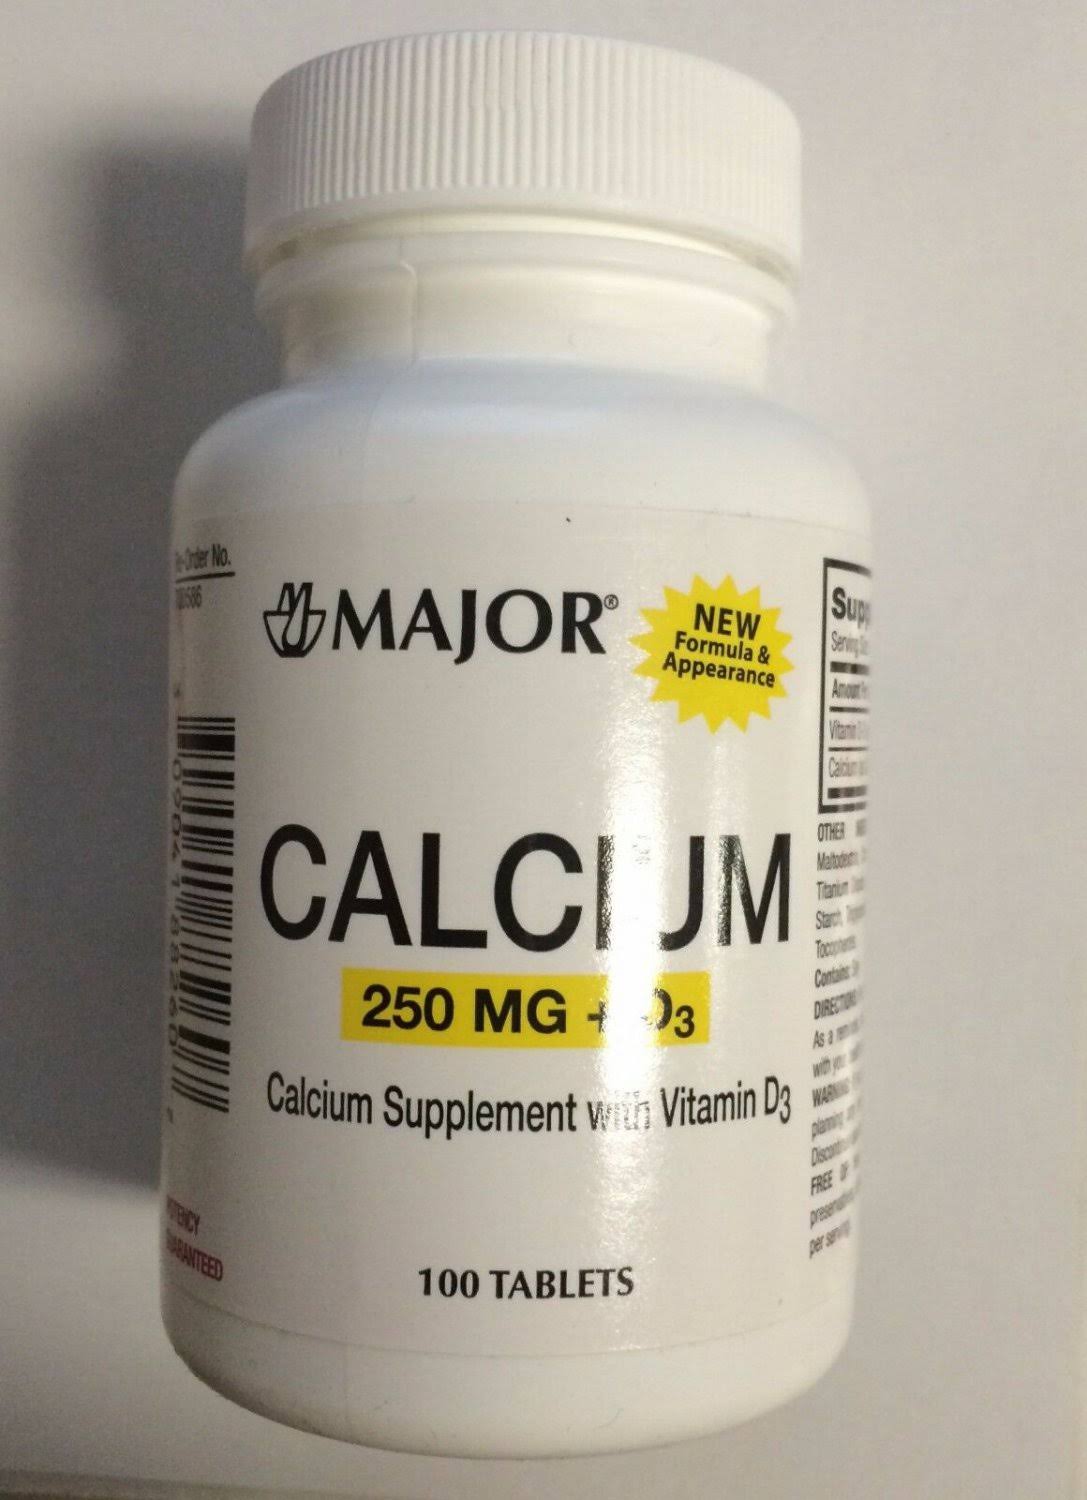 Major Calcium Supplement with Vitamin D3, Tablets 250mg, 100 Ct